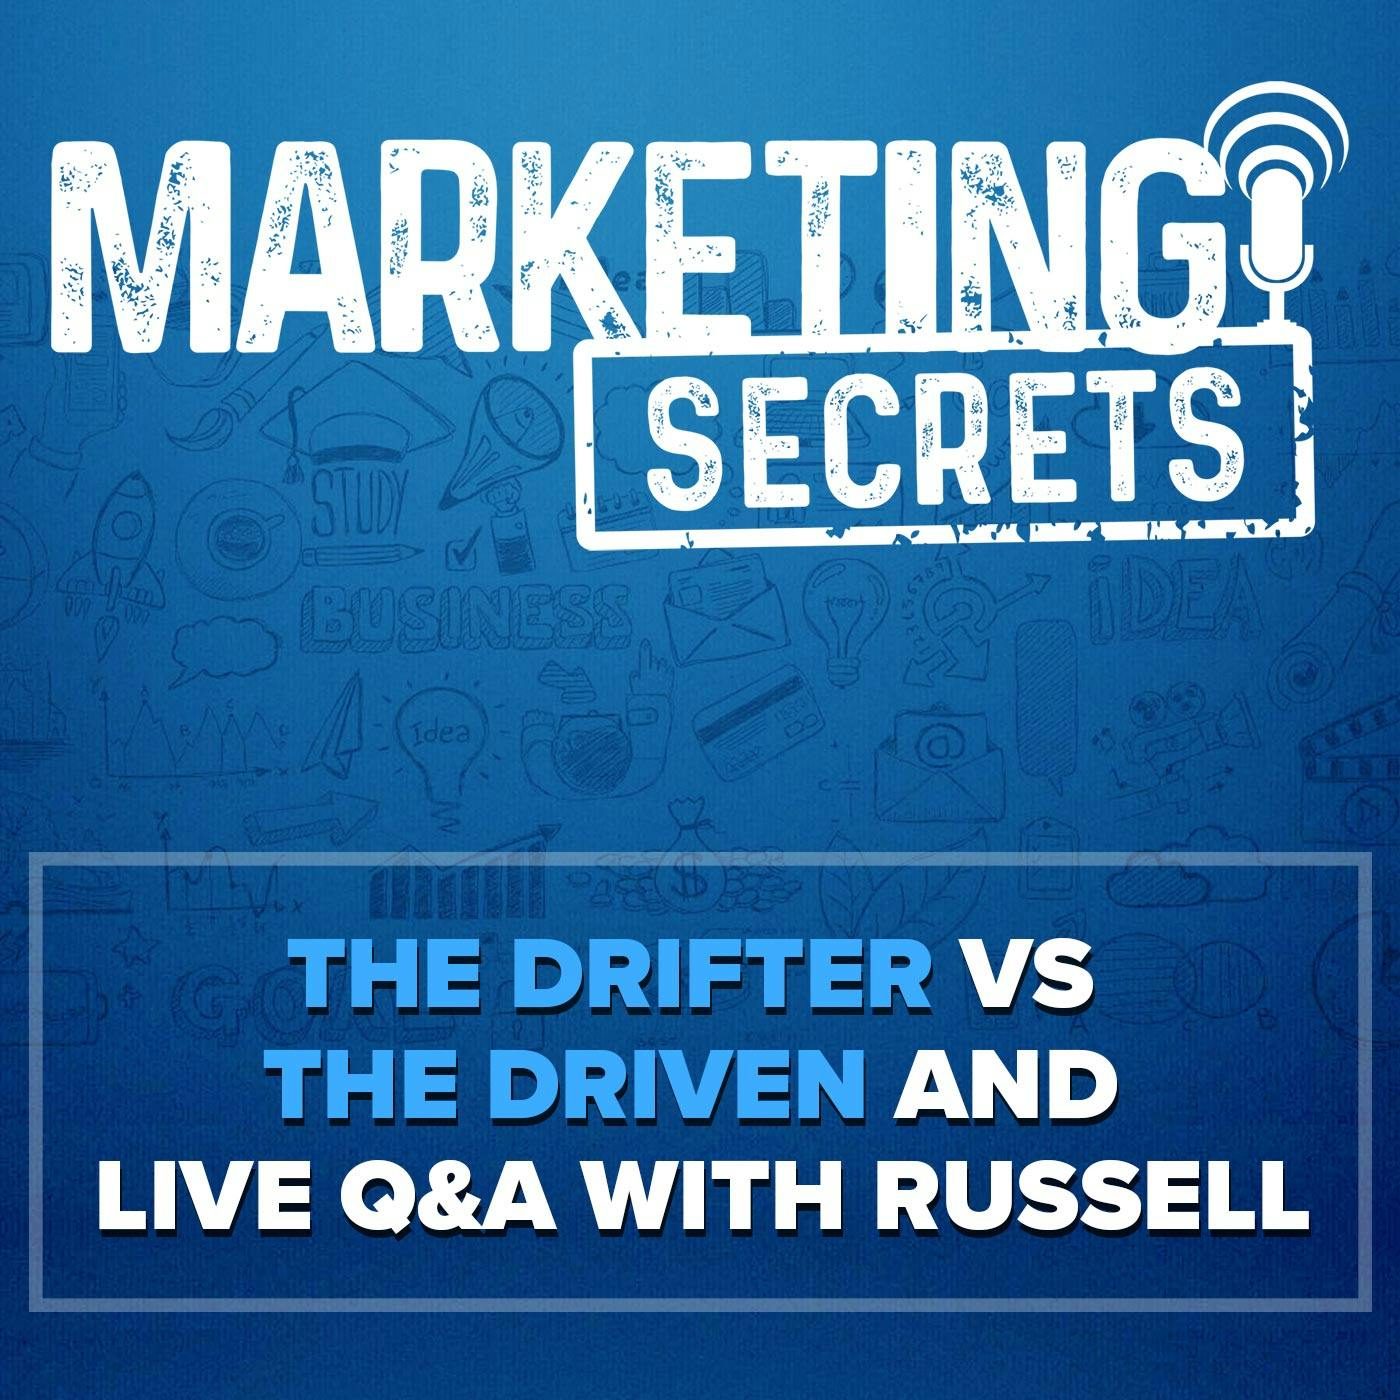 The Drifter Vs The Driven and Live Q&A with Russell